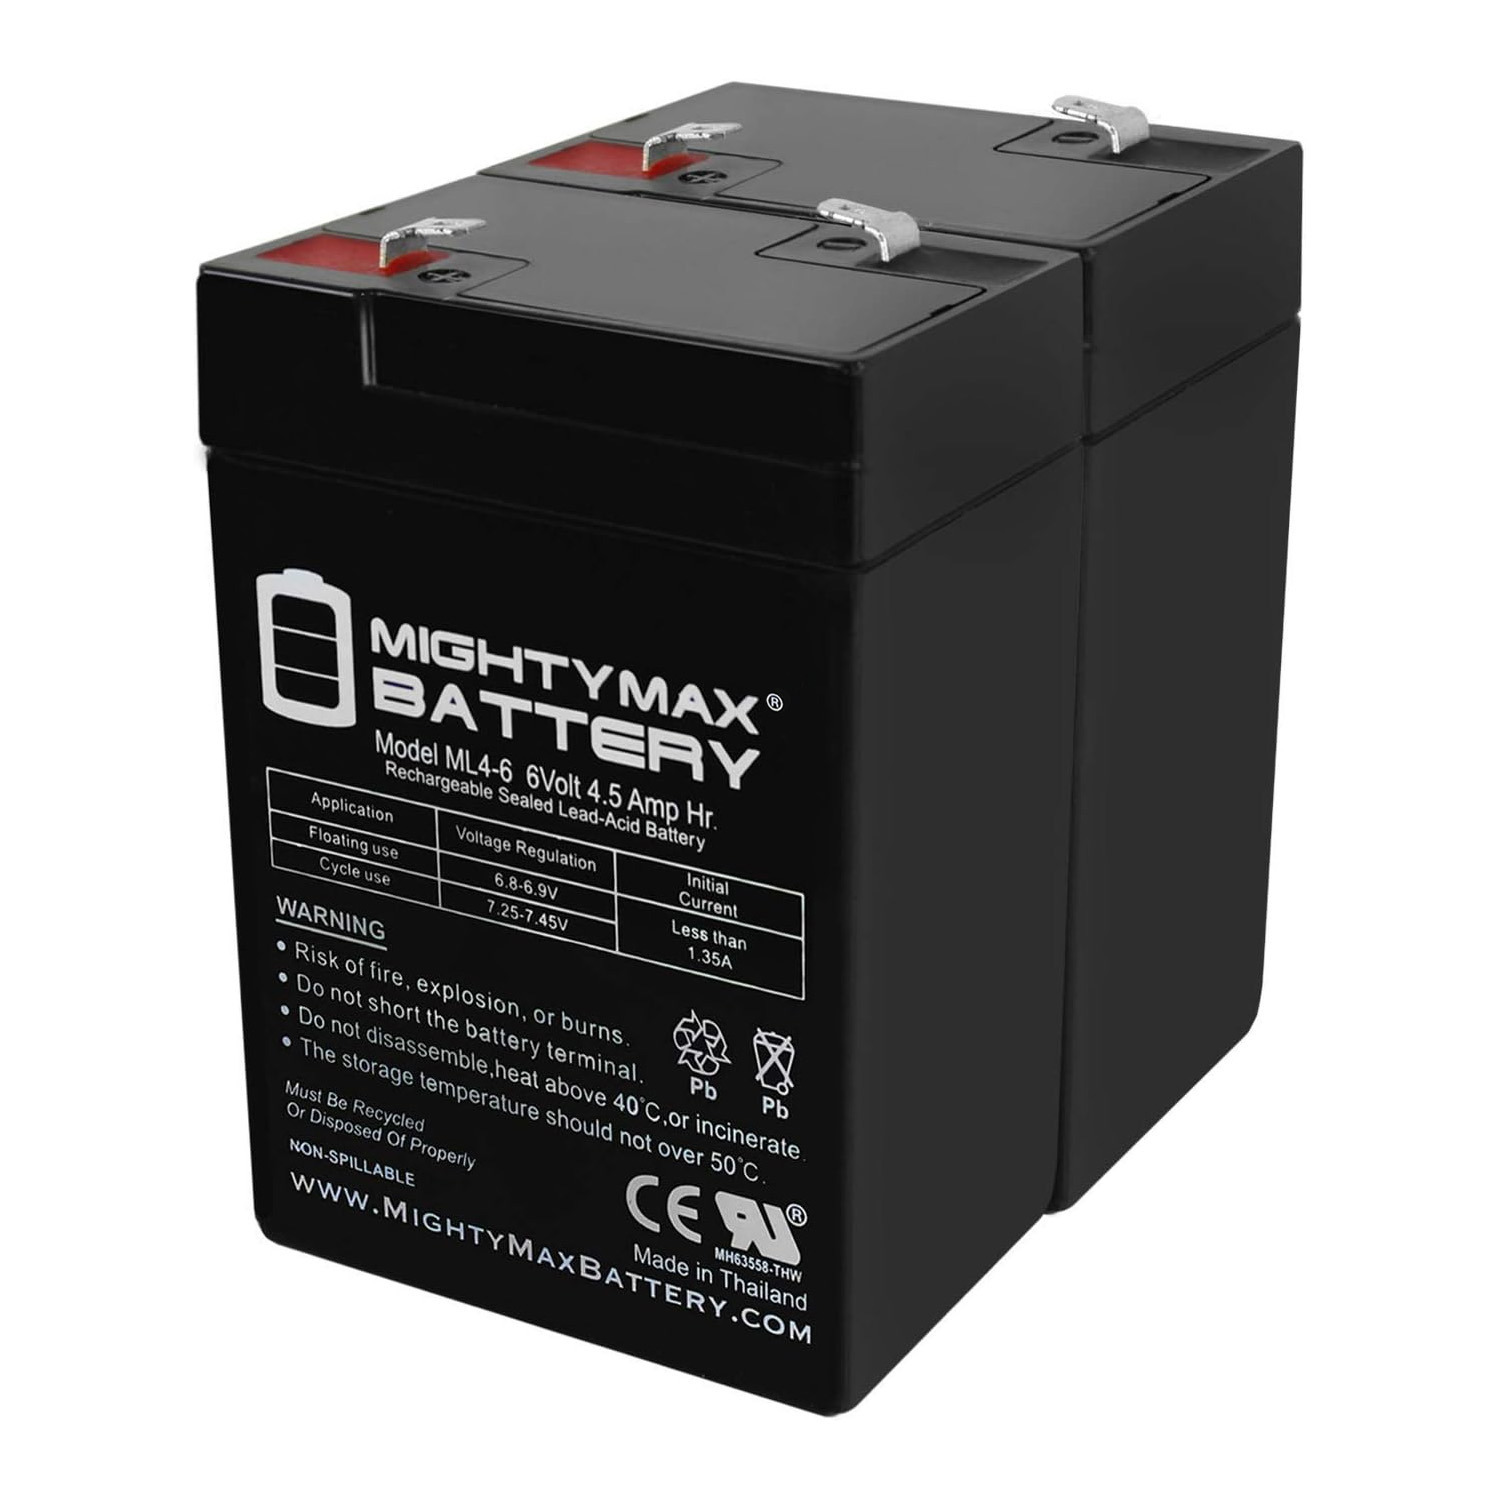 6V 4.5AH SLA Replacement Battery for Chloride 100-001-0224 - 2 Pack